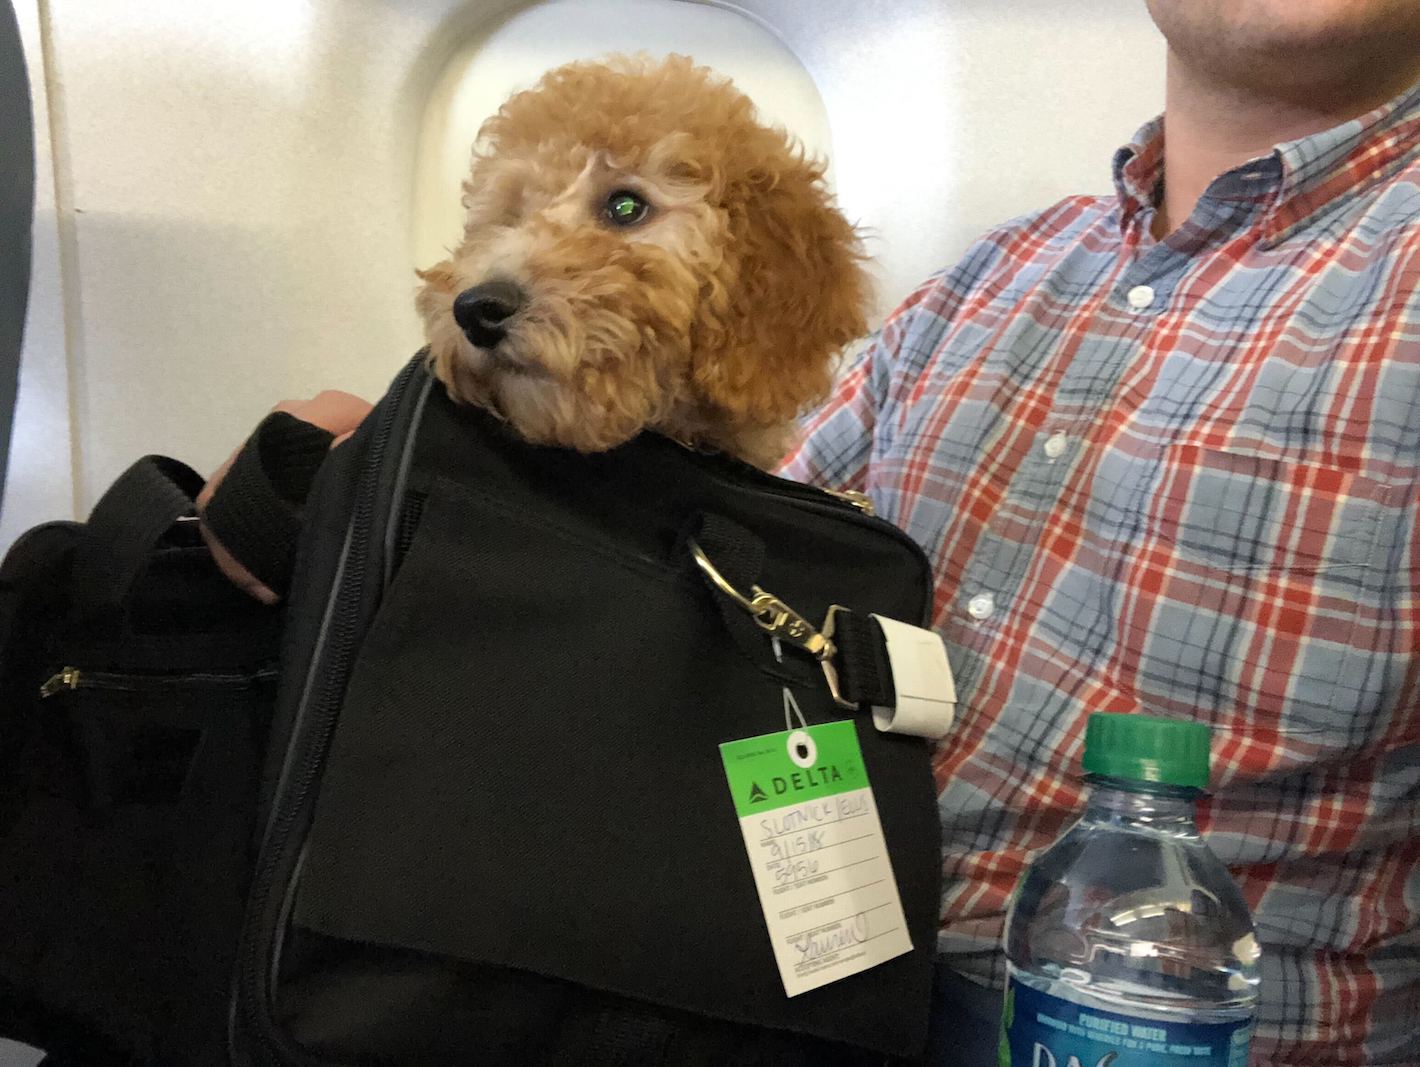 can dogs travel on plane